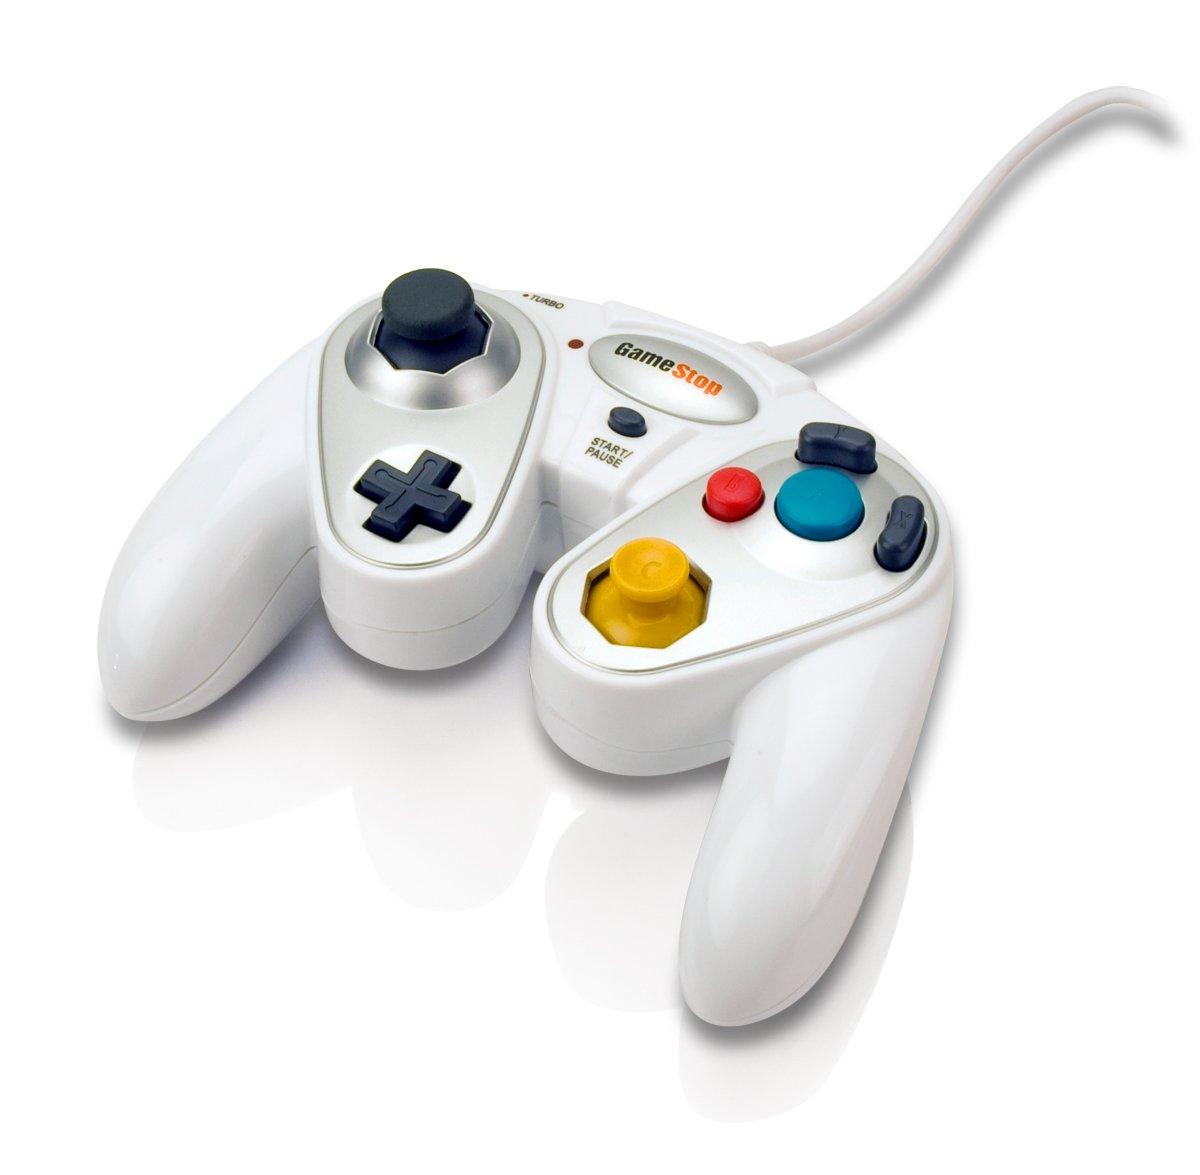 Nintendo Controller for GameCube (Styles May Vary)